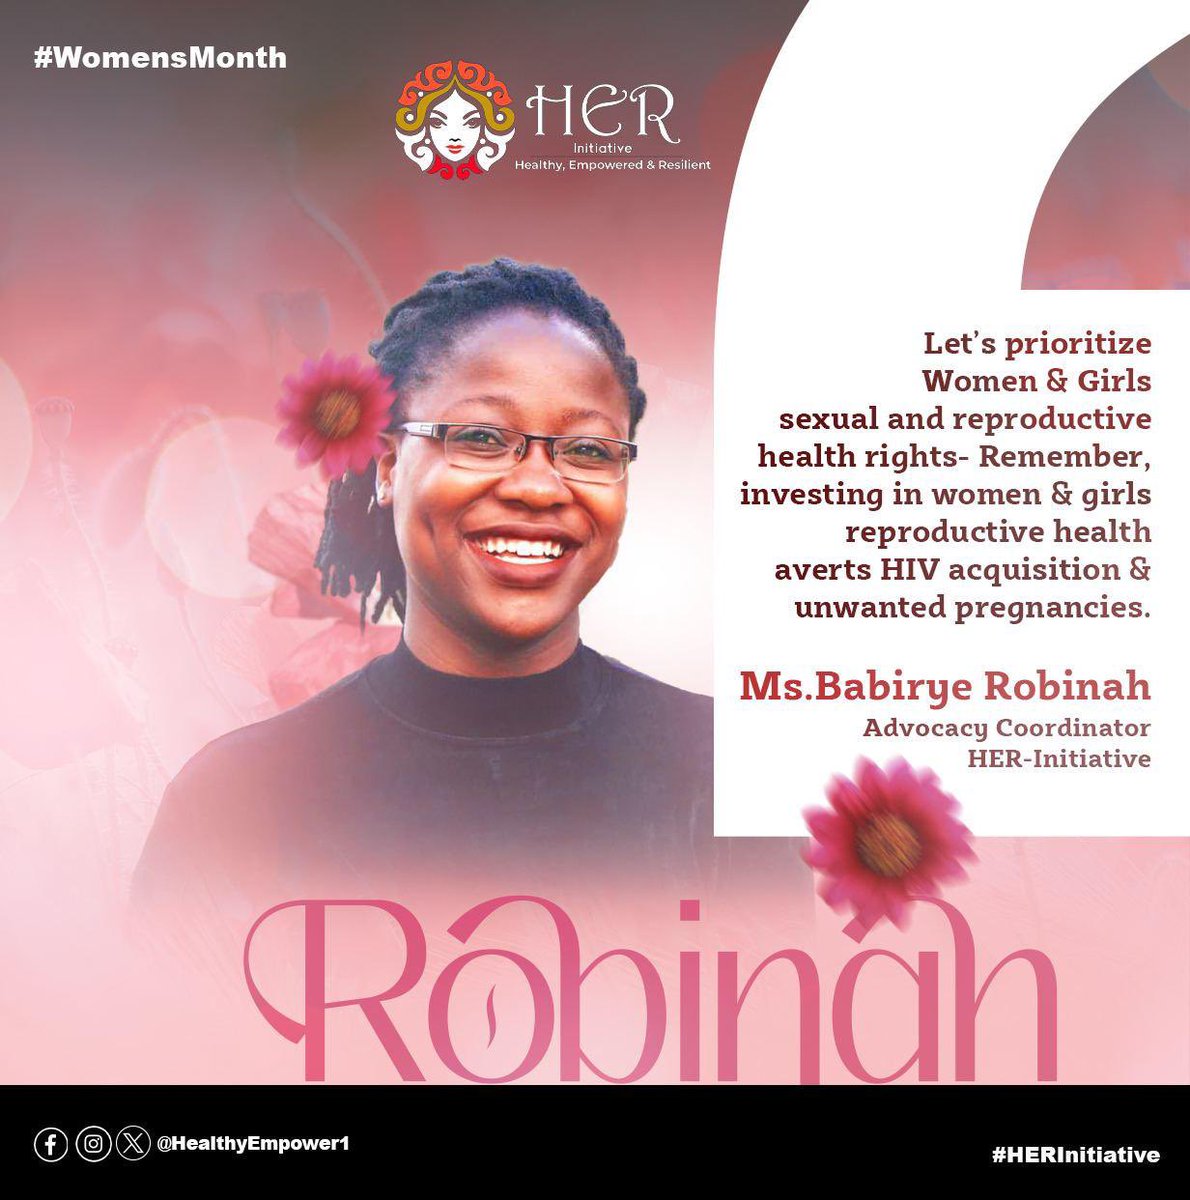 Our mandate is to ensure that all women and girls 🚺 irrespective of their status & identity access #SRHR services and are free from #HIV acquisition.

#InvestingInWomen 
#InternationalWomensDay